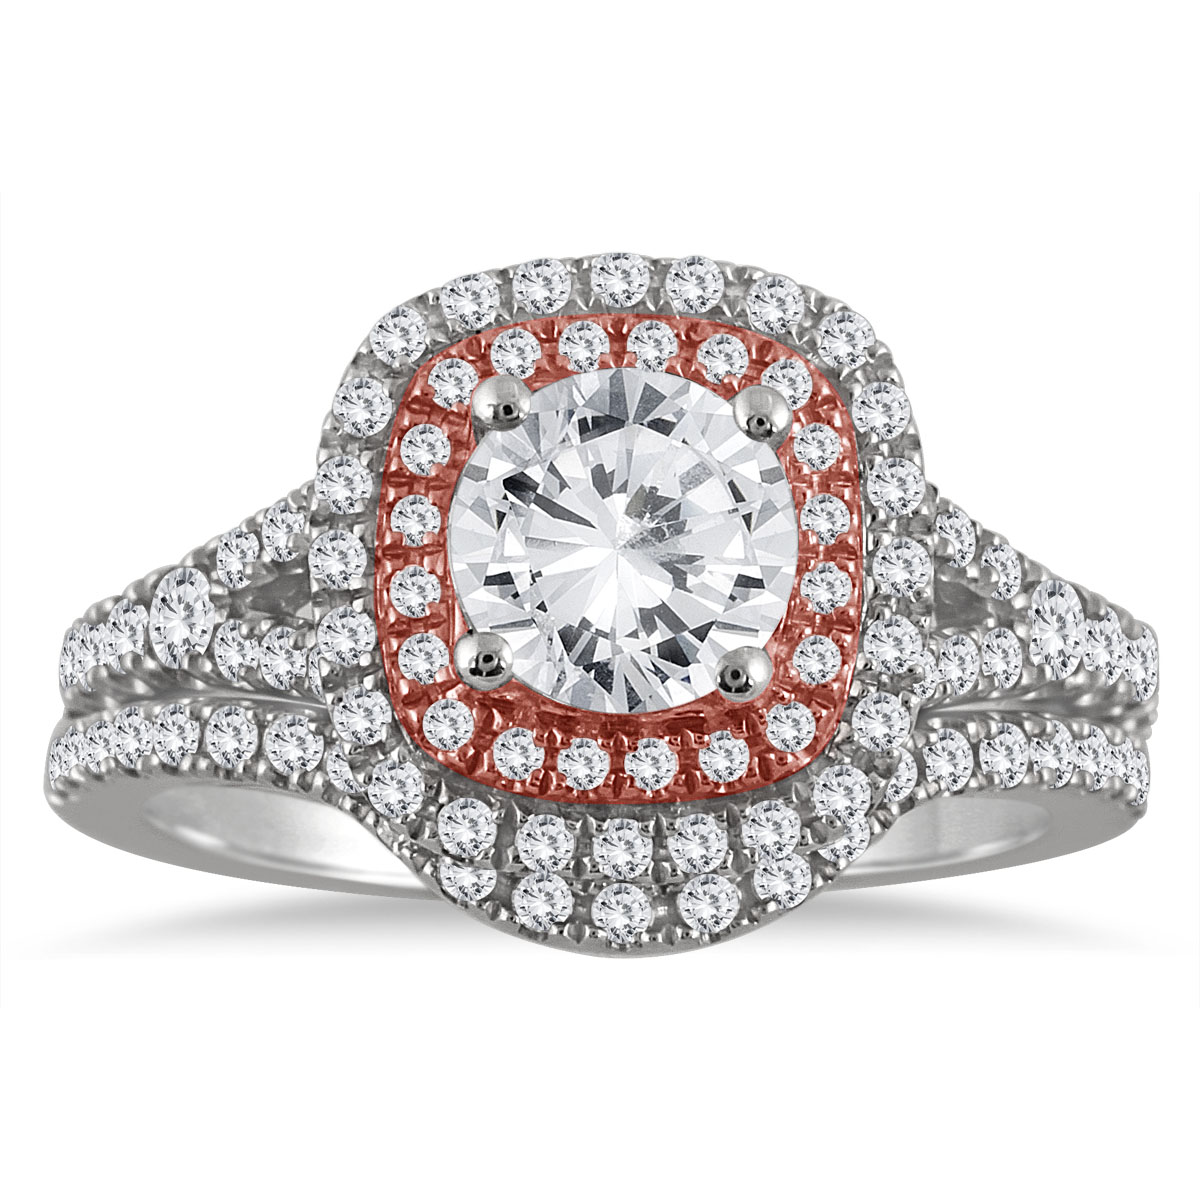 Image of AGS Certified 1 5/8 Carat TW Diamond Bridal Set in 14K Rose and White Gold (H-I Color I1-I2 Clarity)